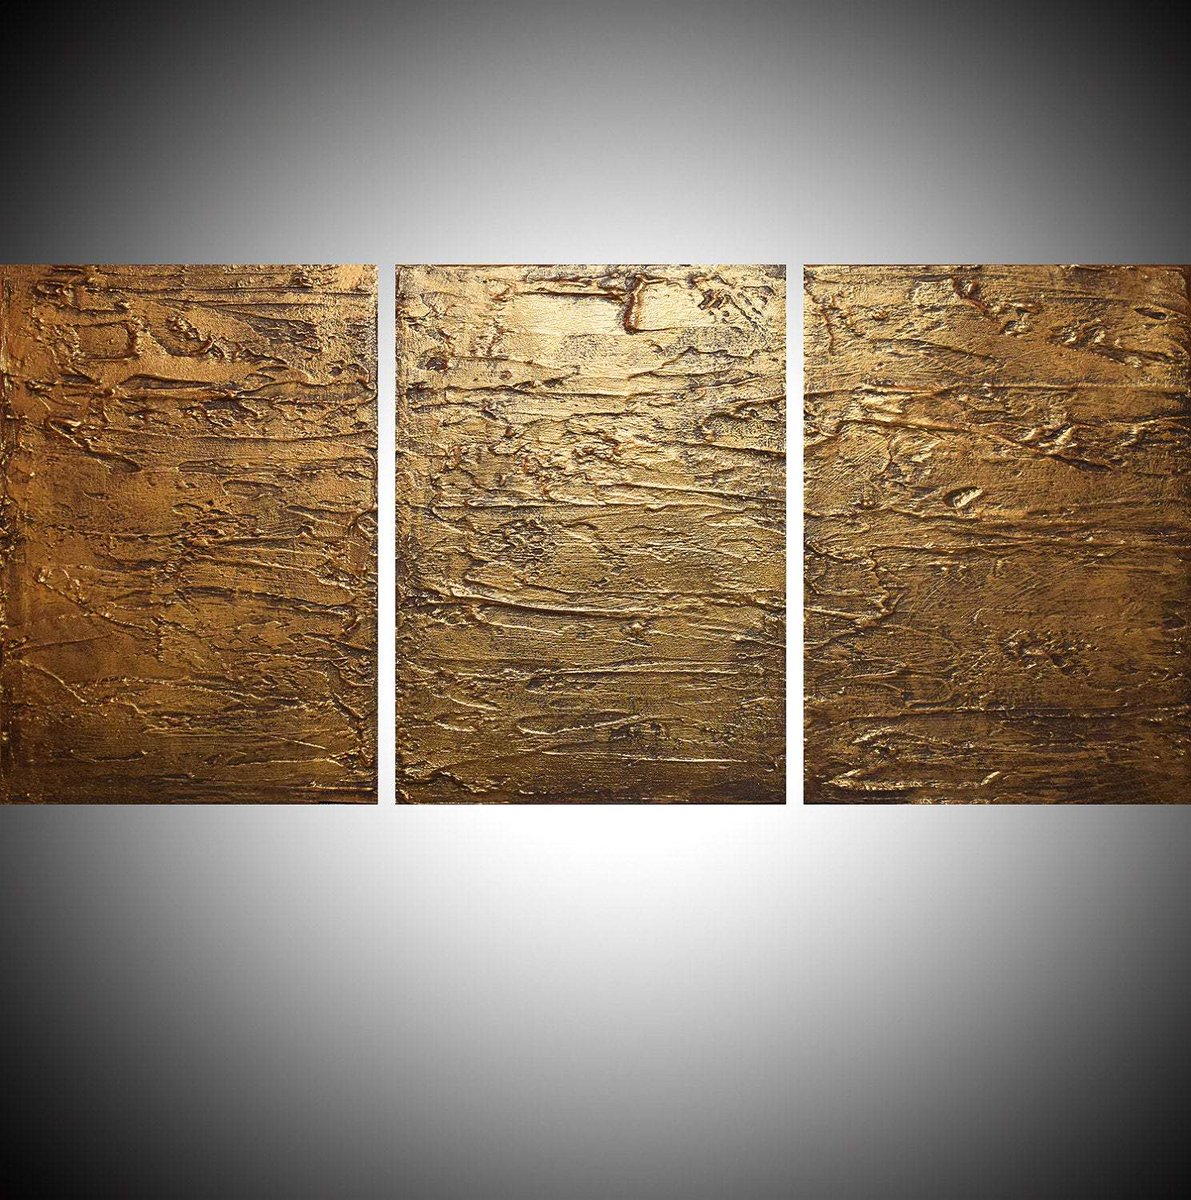 oversized metal wall art canvas triptych  ' Gold Triptych ' beautiful and elegant tuppu.net/fc06fa59 #painting #original #BrownPainting